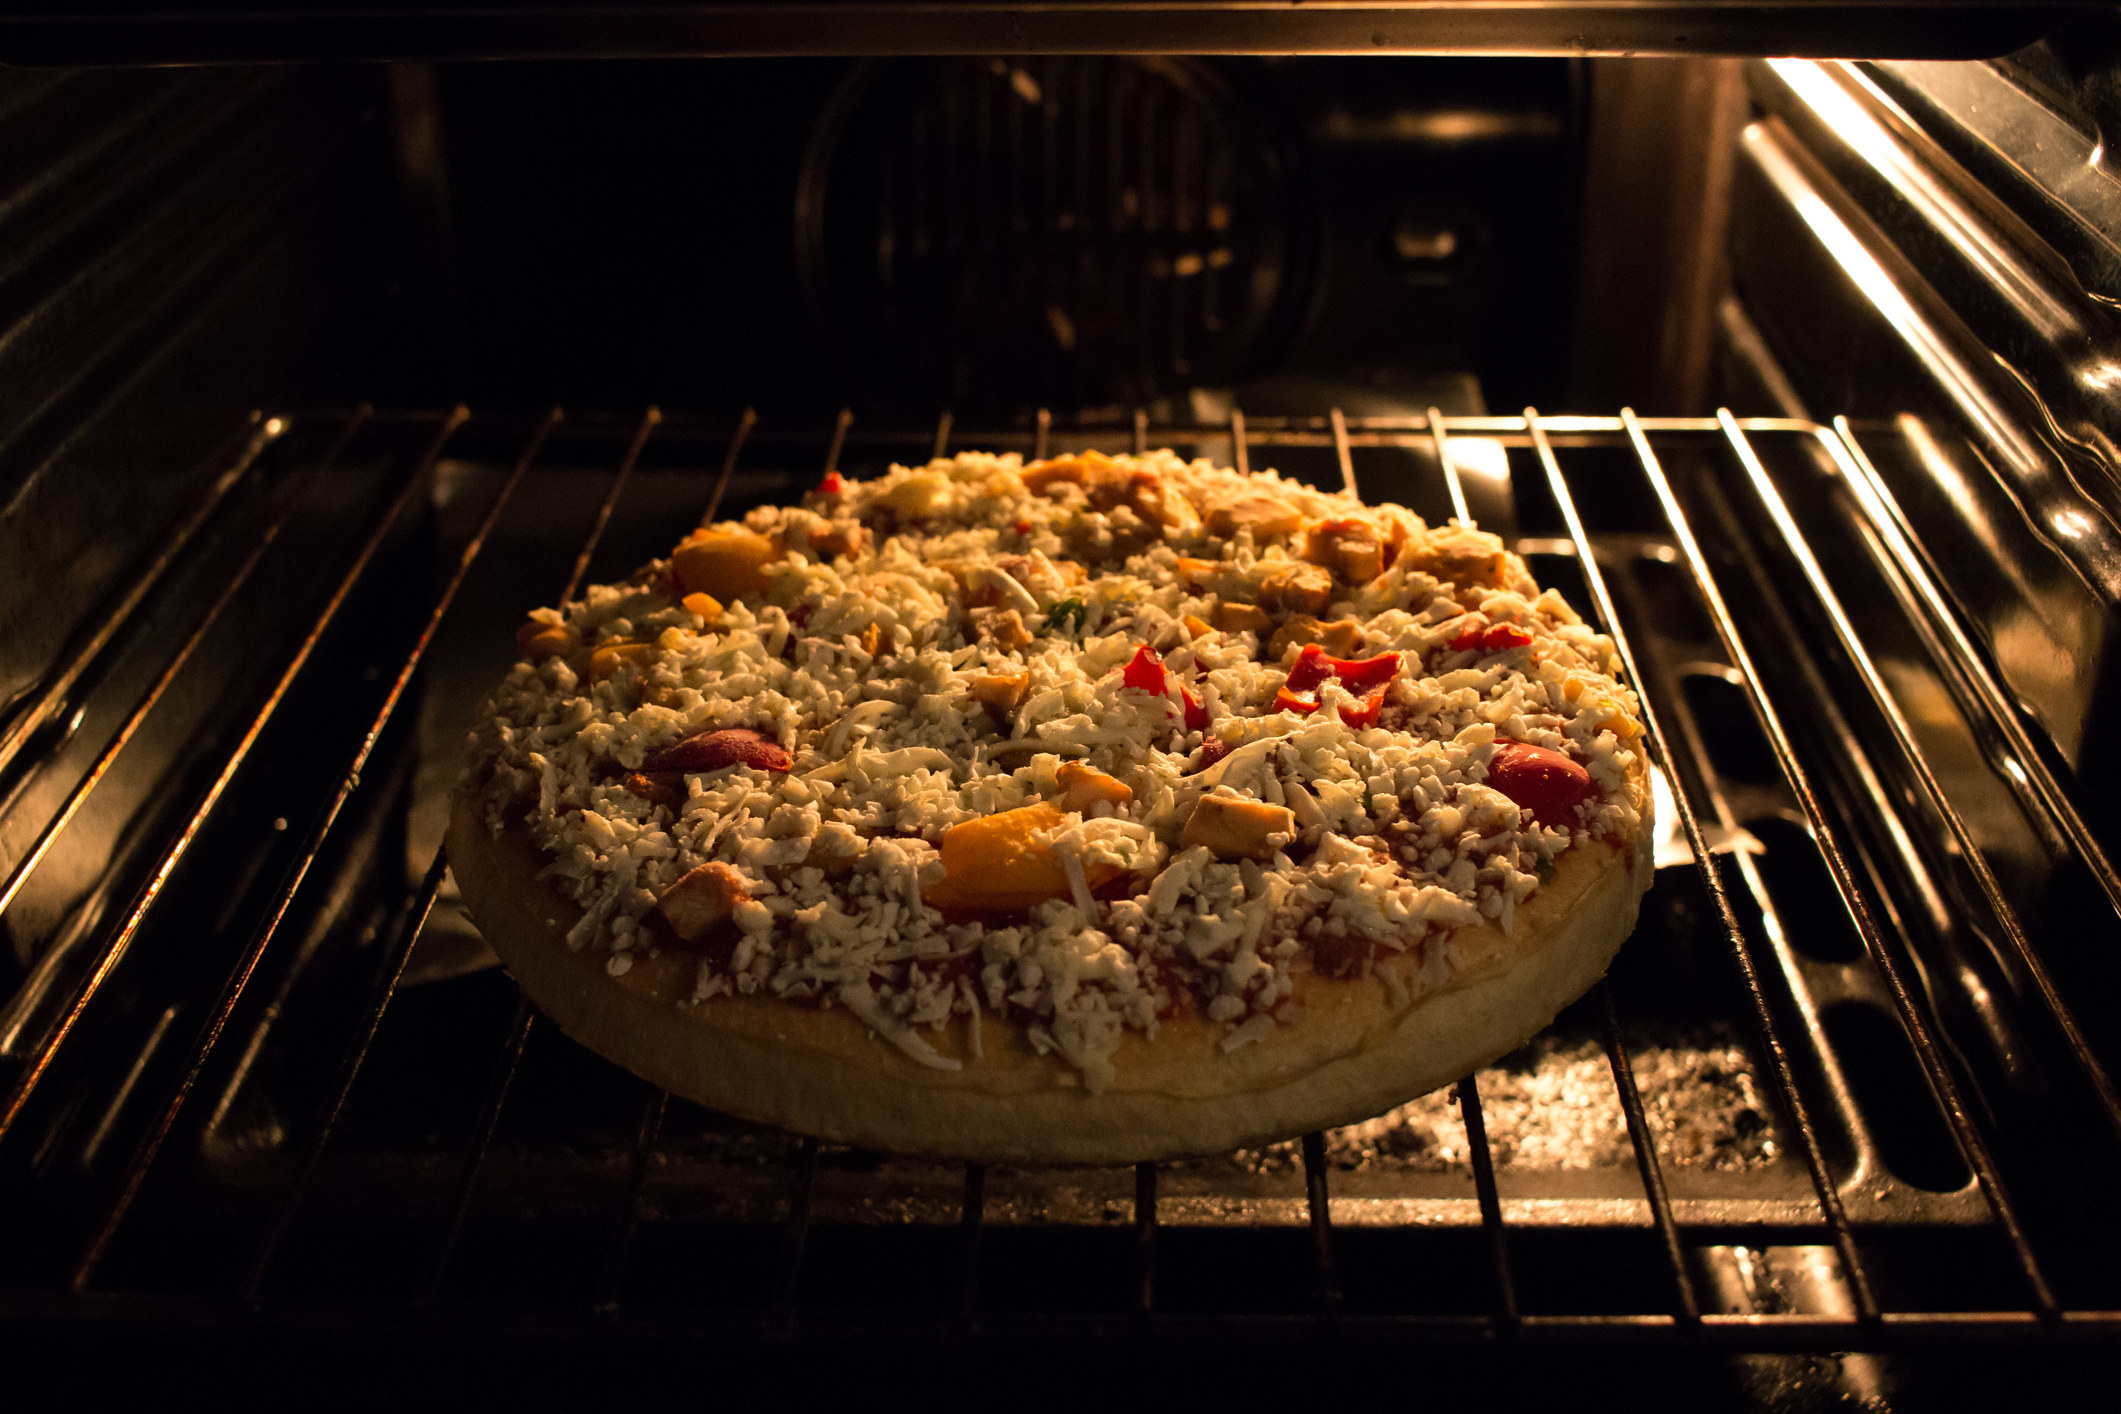 A frozen pizza in an oven.